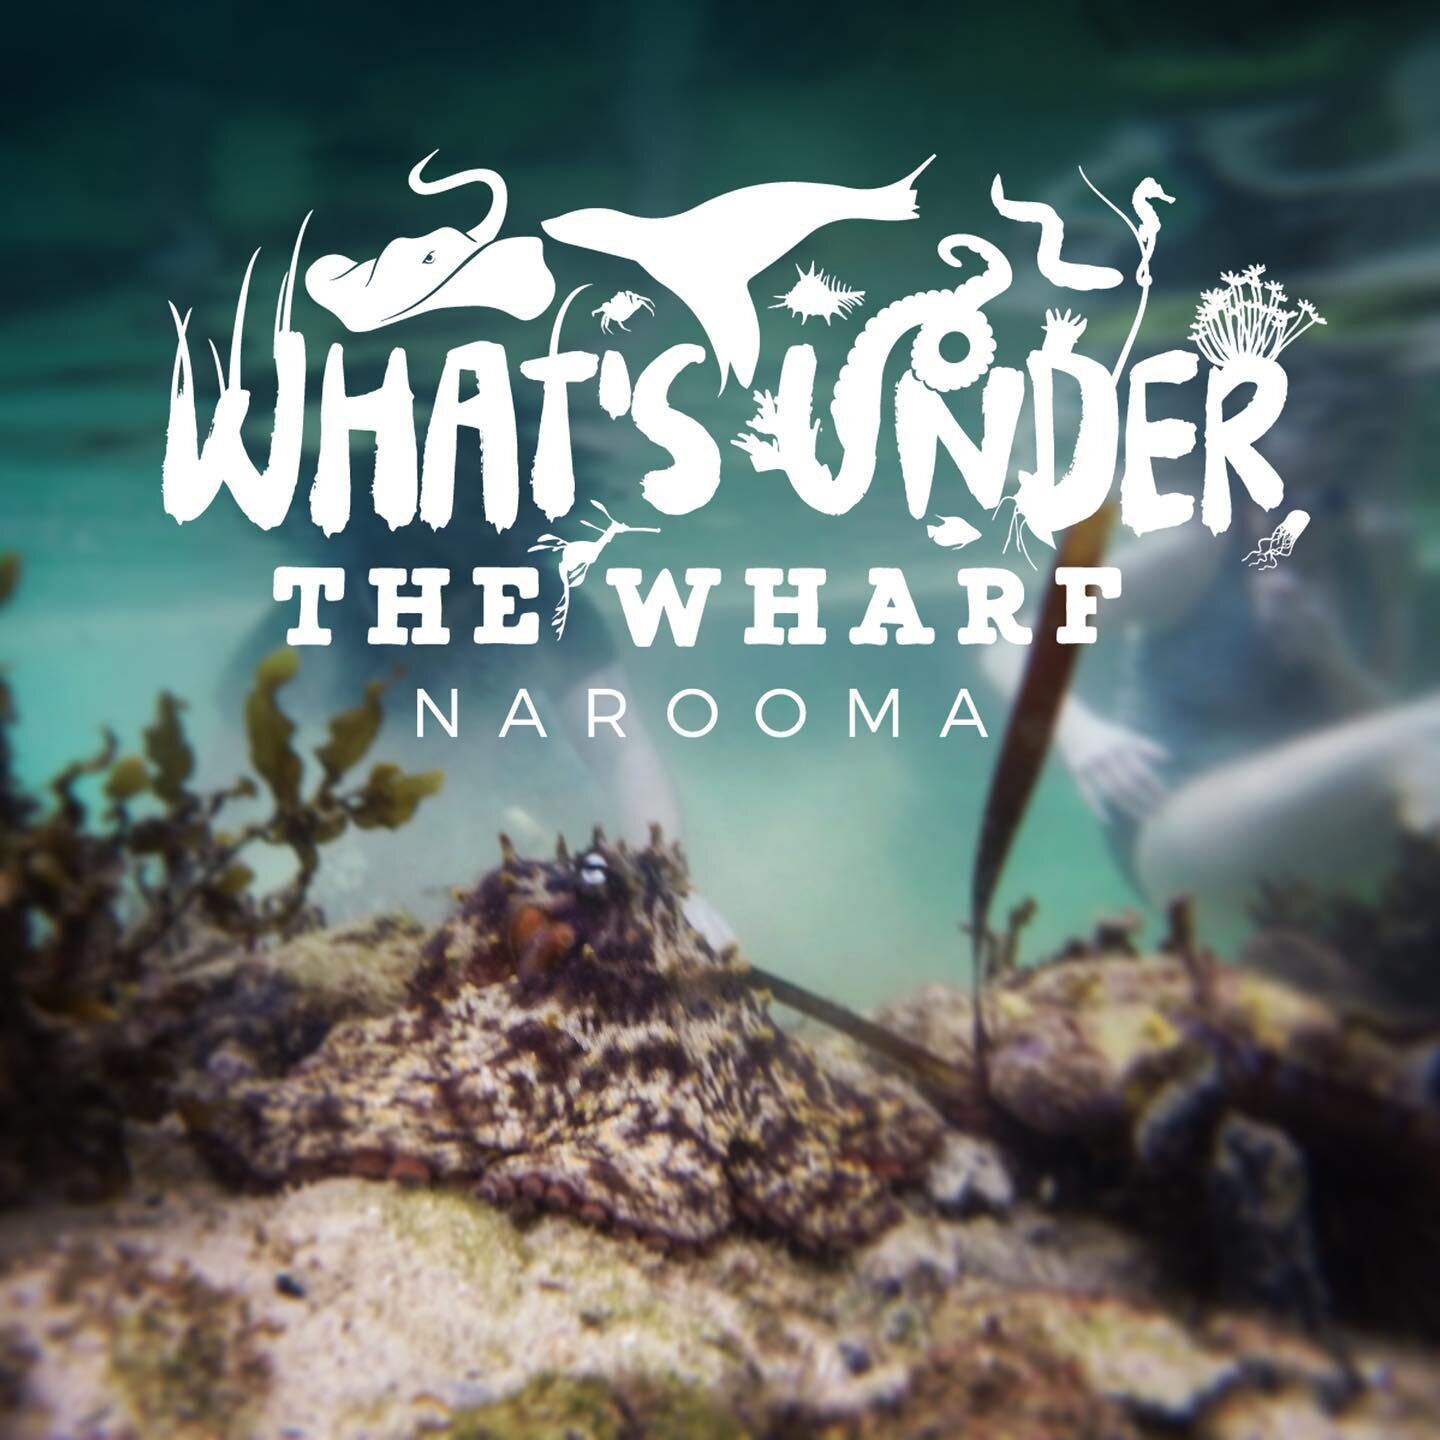 If you go under the wharf today&hellip; great turn out for @thencmg second What&rsquo;s under the Wharf event of 2023, back by popular demand after a great Jan event to showcase life beneath the surface including the underwater ROV sending film to a 